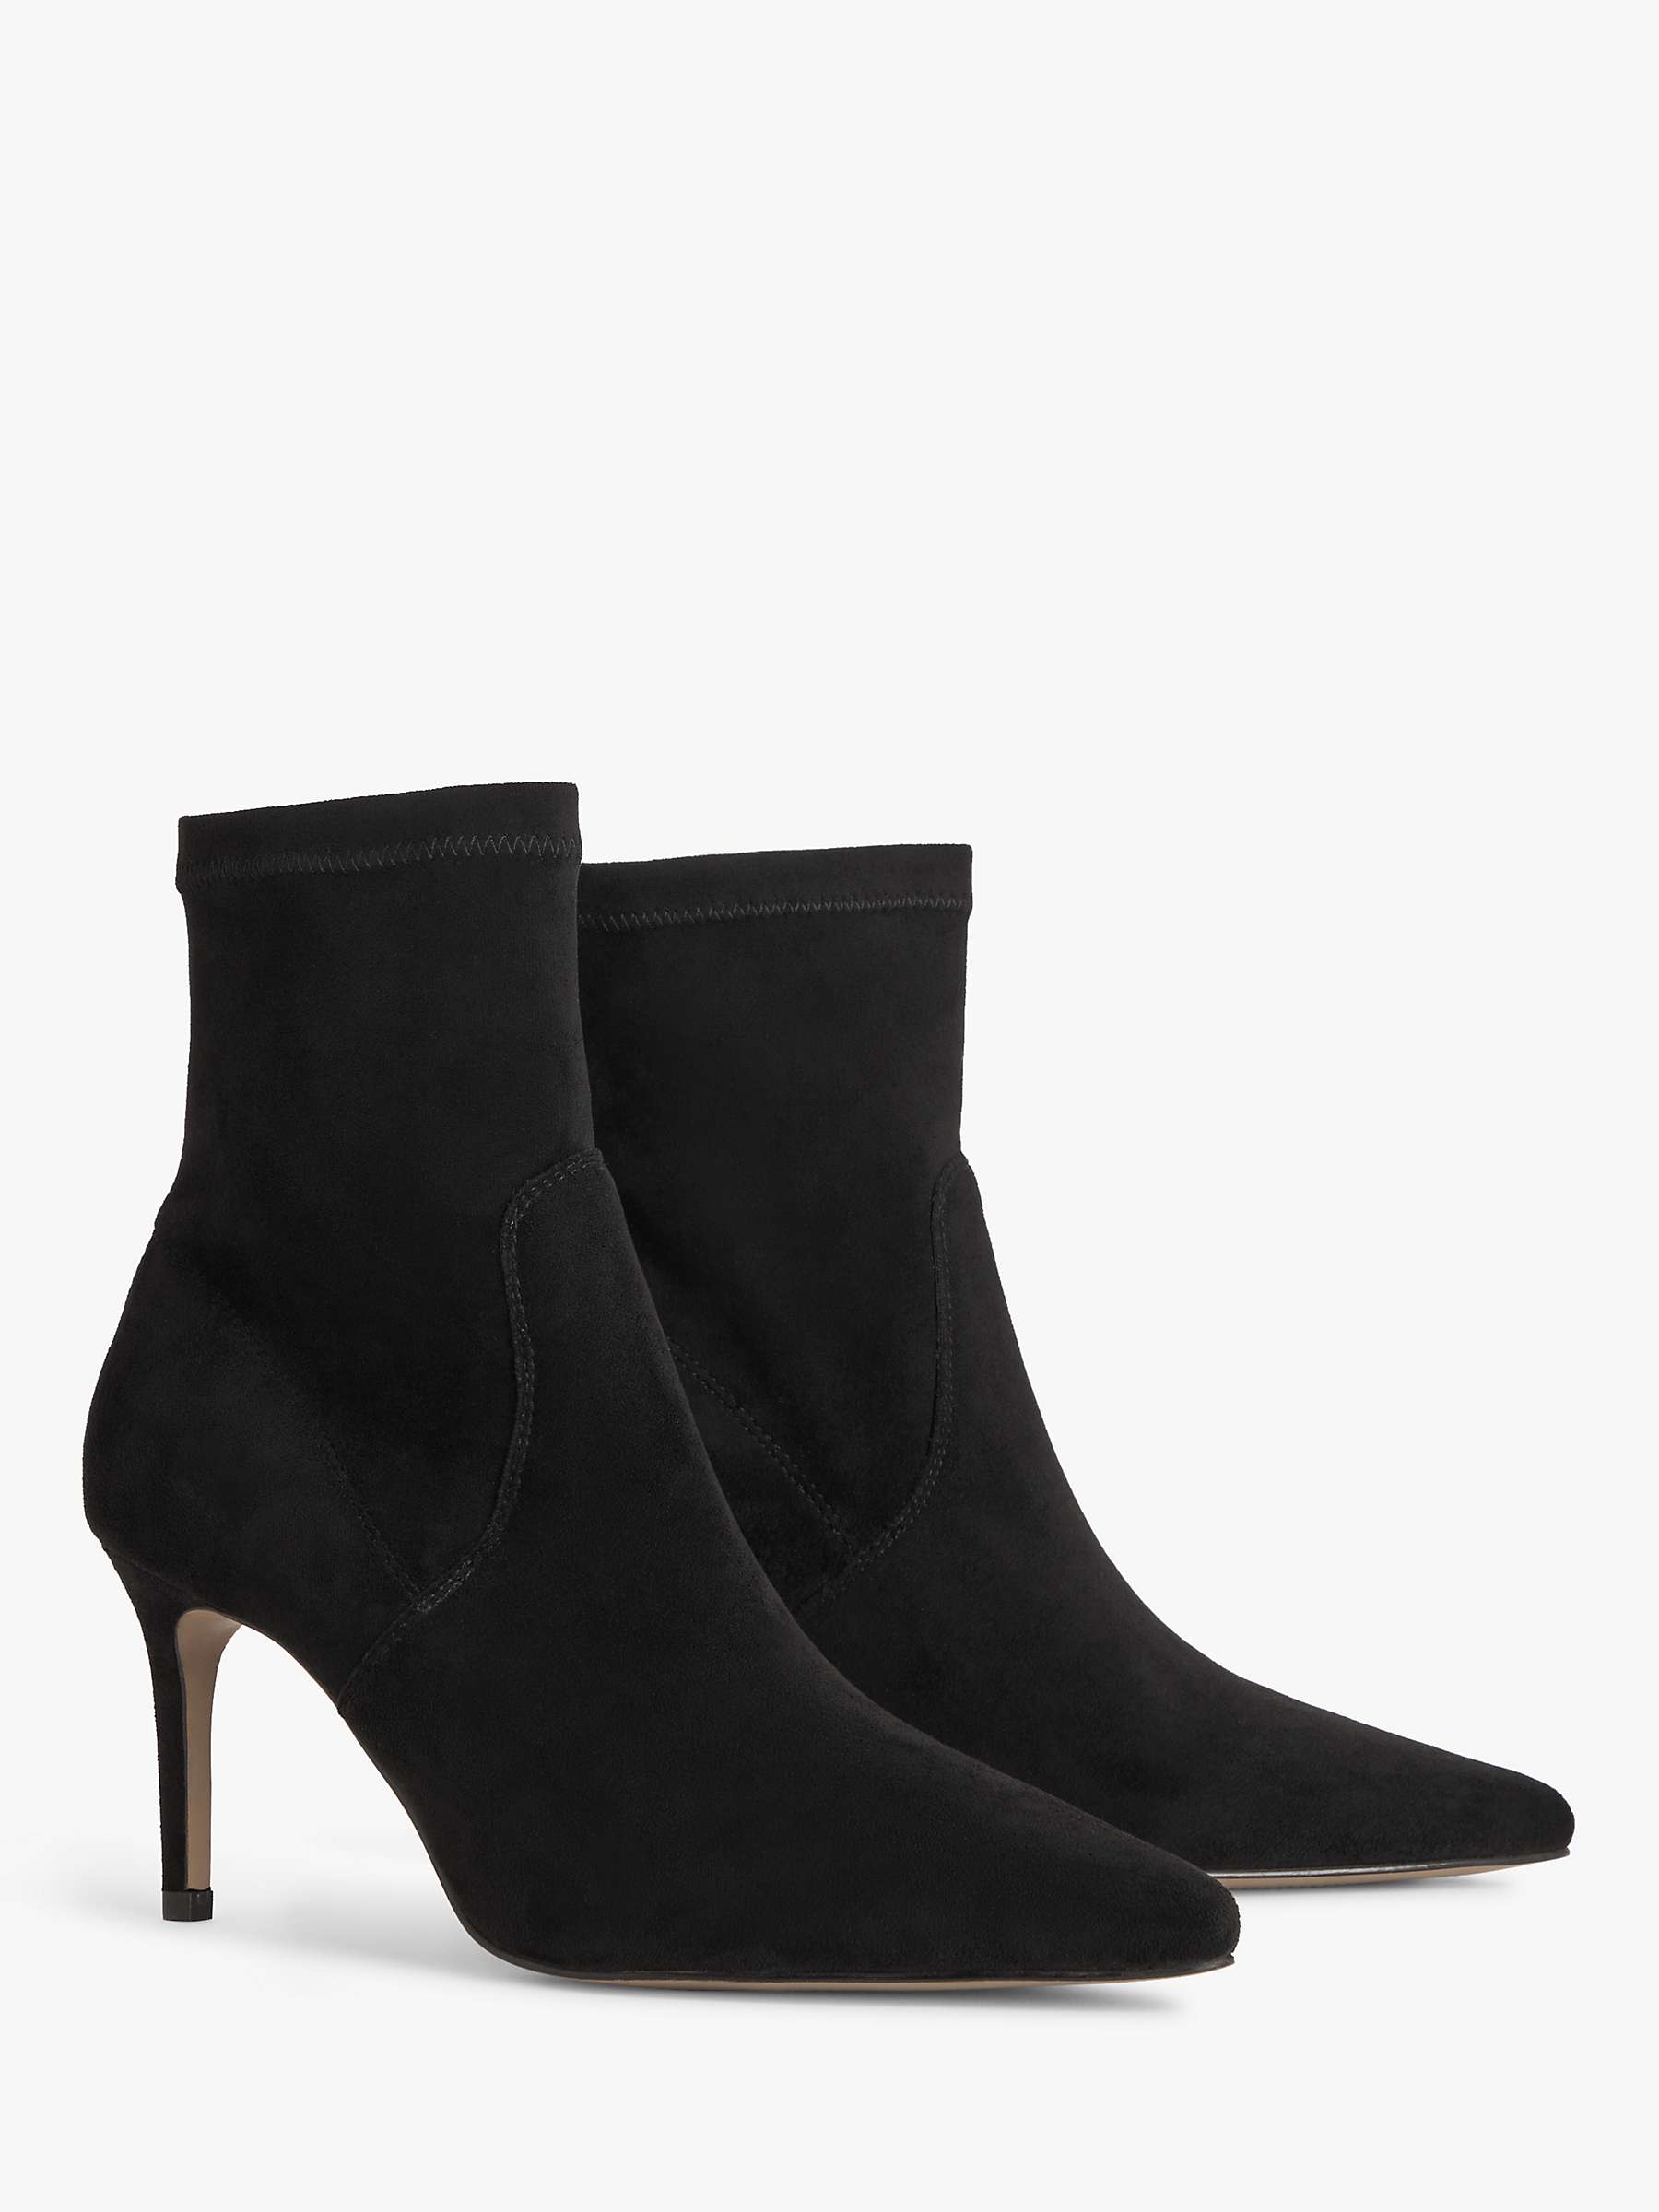 Buy John Lewis Olivia Microfibre Stretch Stiletto Heel Ankle Boots Online at johnlewis.com